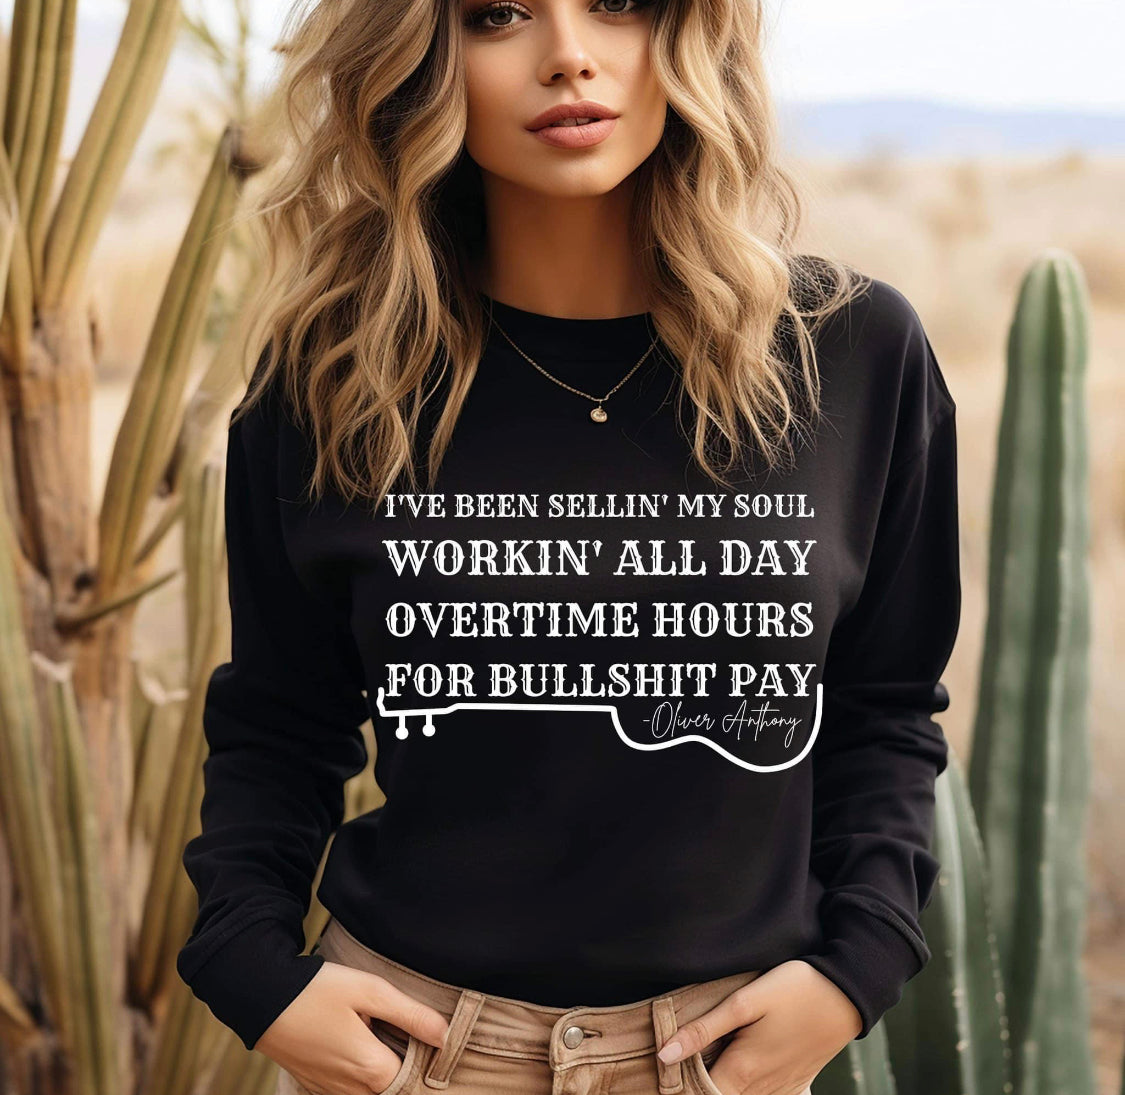 I’ve been selling my soul sweatshirt - Forever Western Boutique